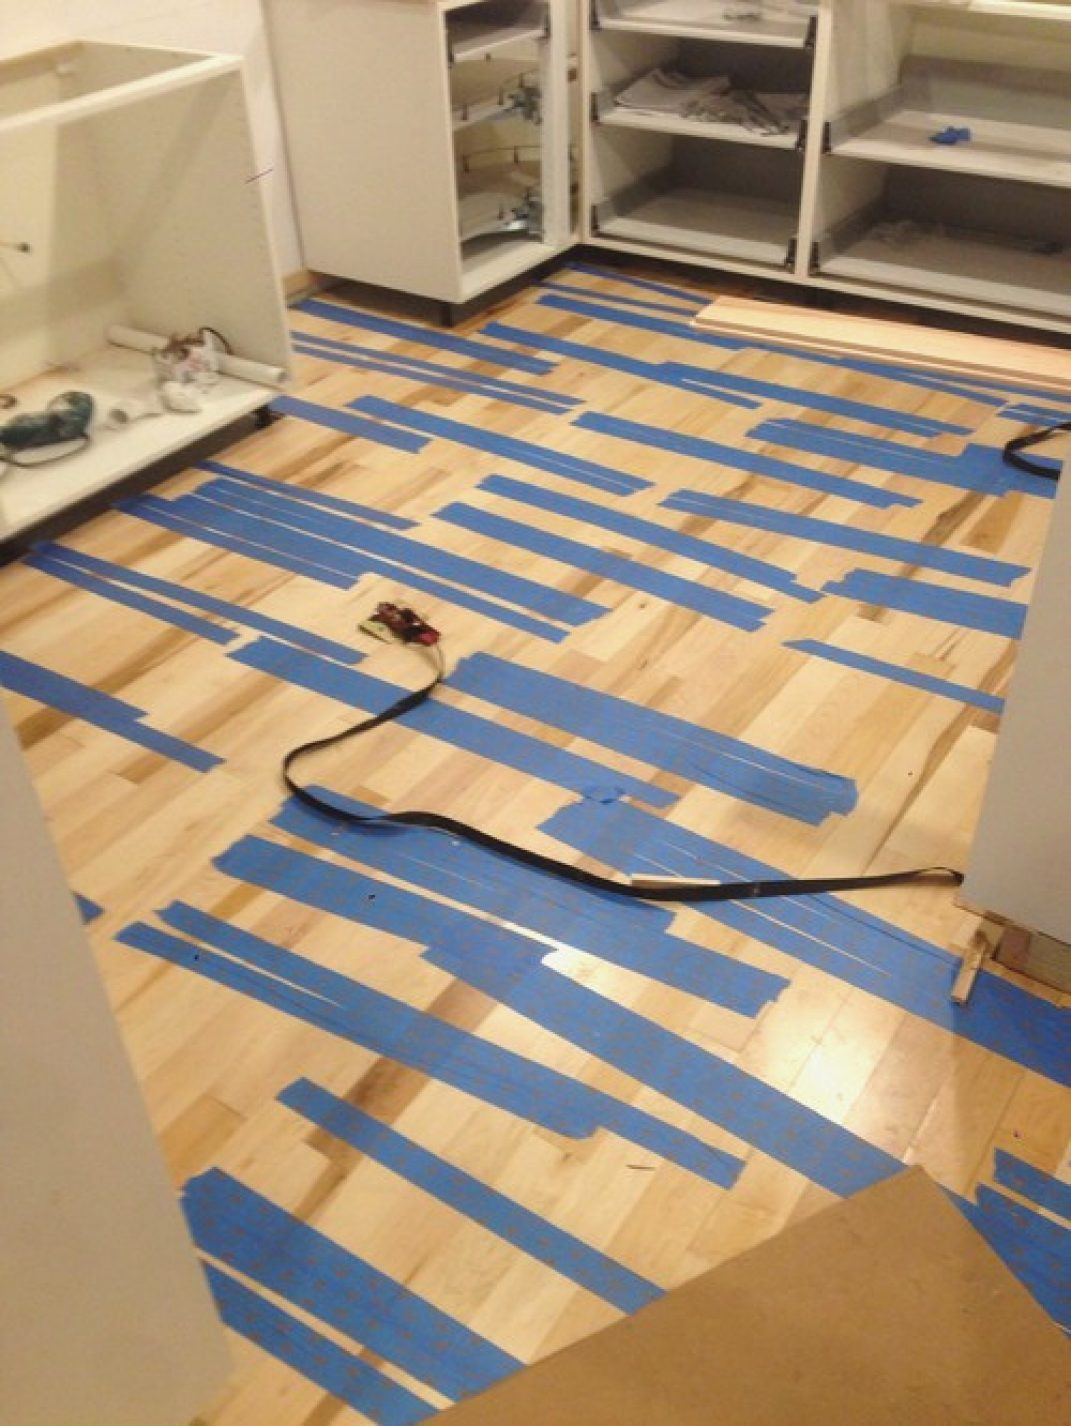 30 Lovable How to Install Glue Down Hardwood Floors 2024 free download how to install glue down hardwood floors of wood flooring glue gluing down prefinished solid hardwood floors within wood flooring glue gluing down prefinished solid hardwood floors directly 